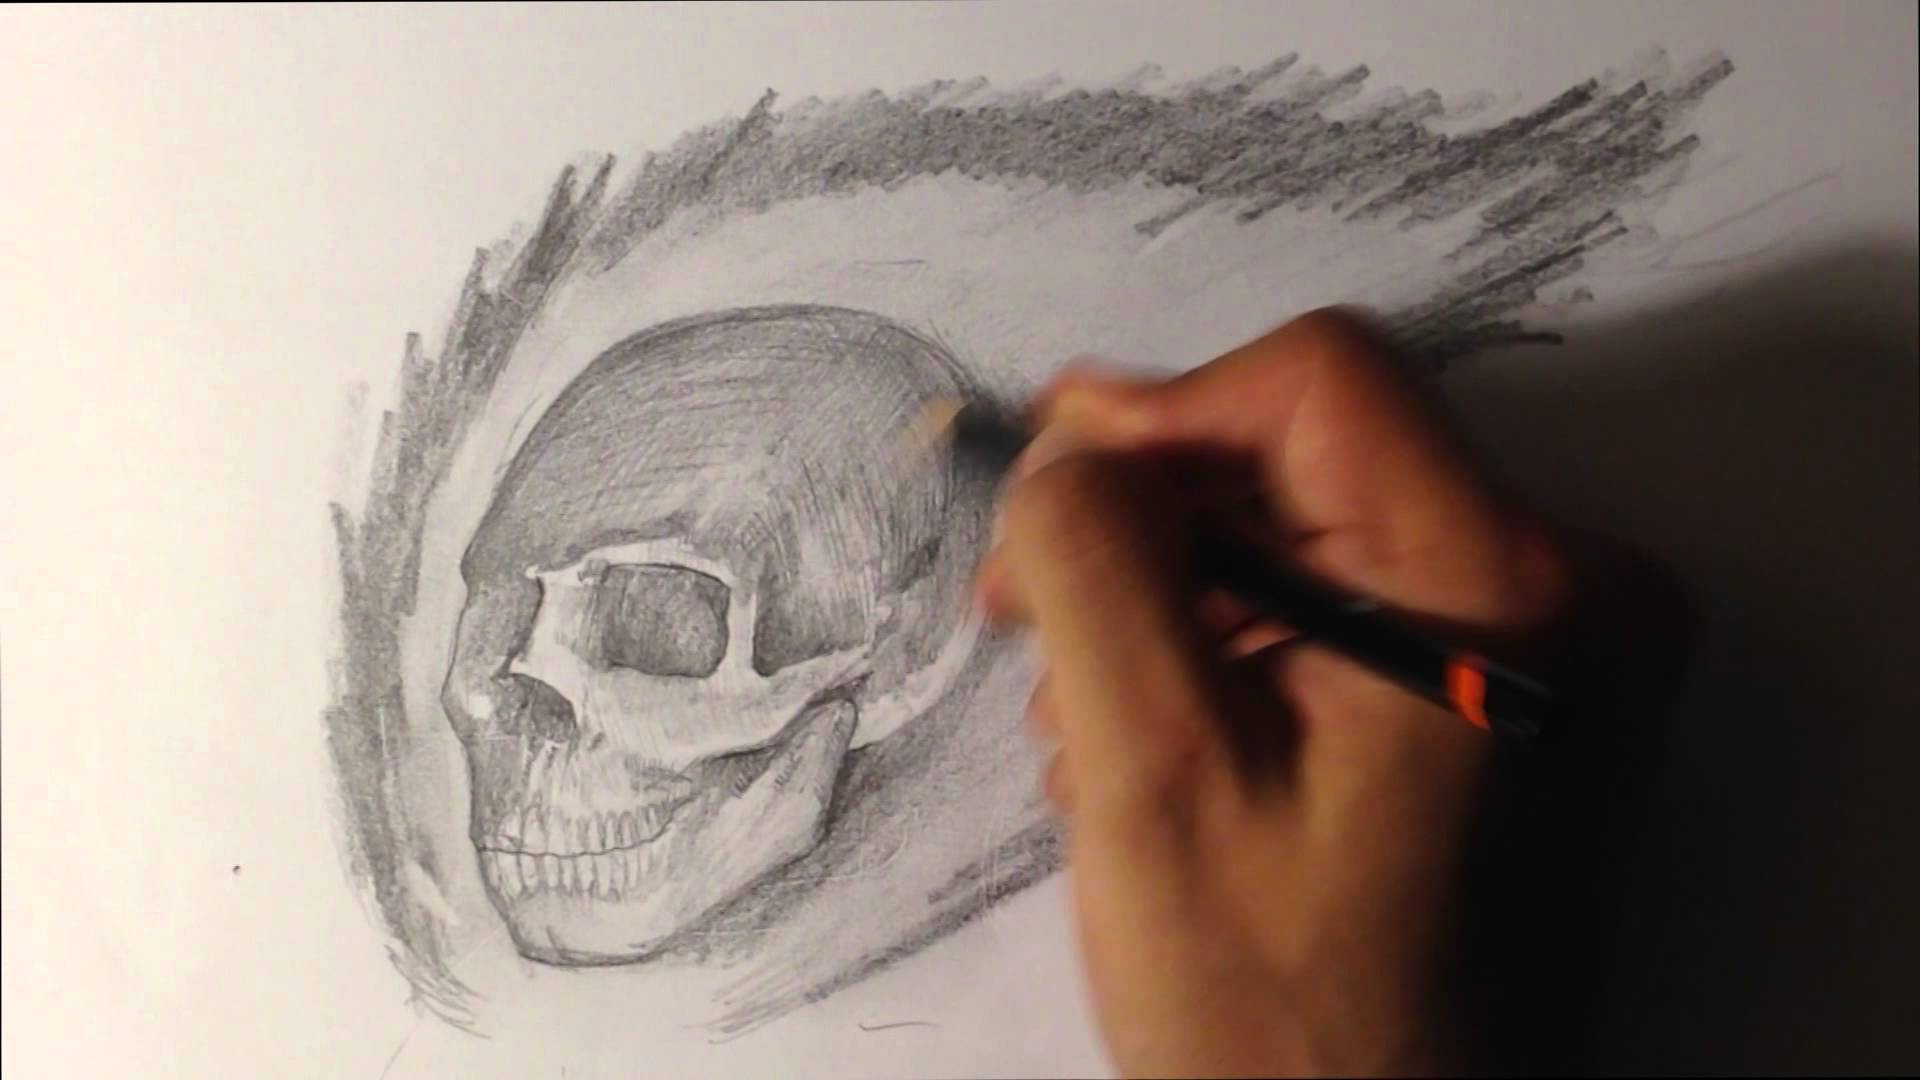 1920x1080 How To Draw A Skull On Fire.